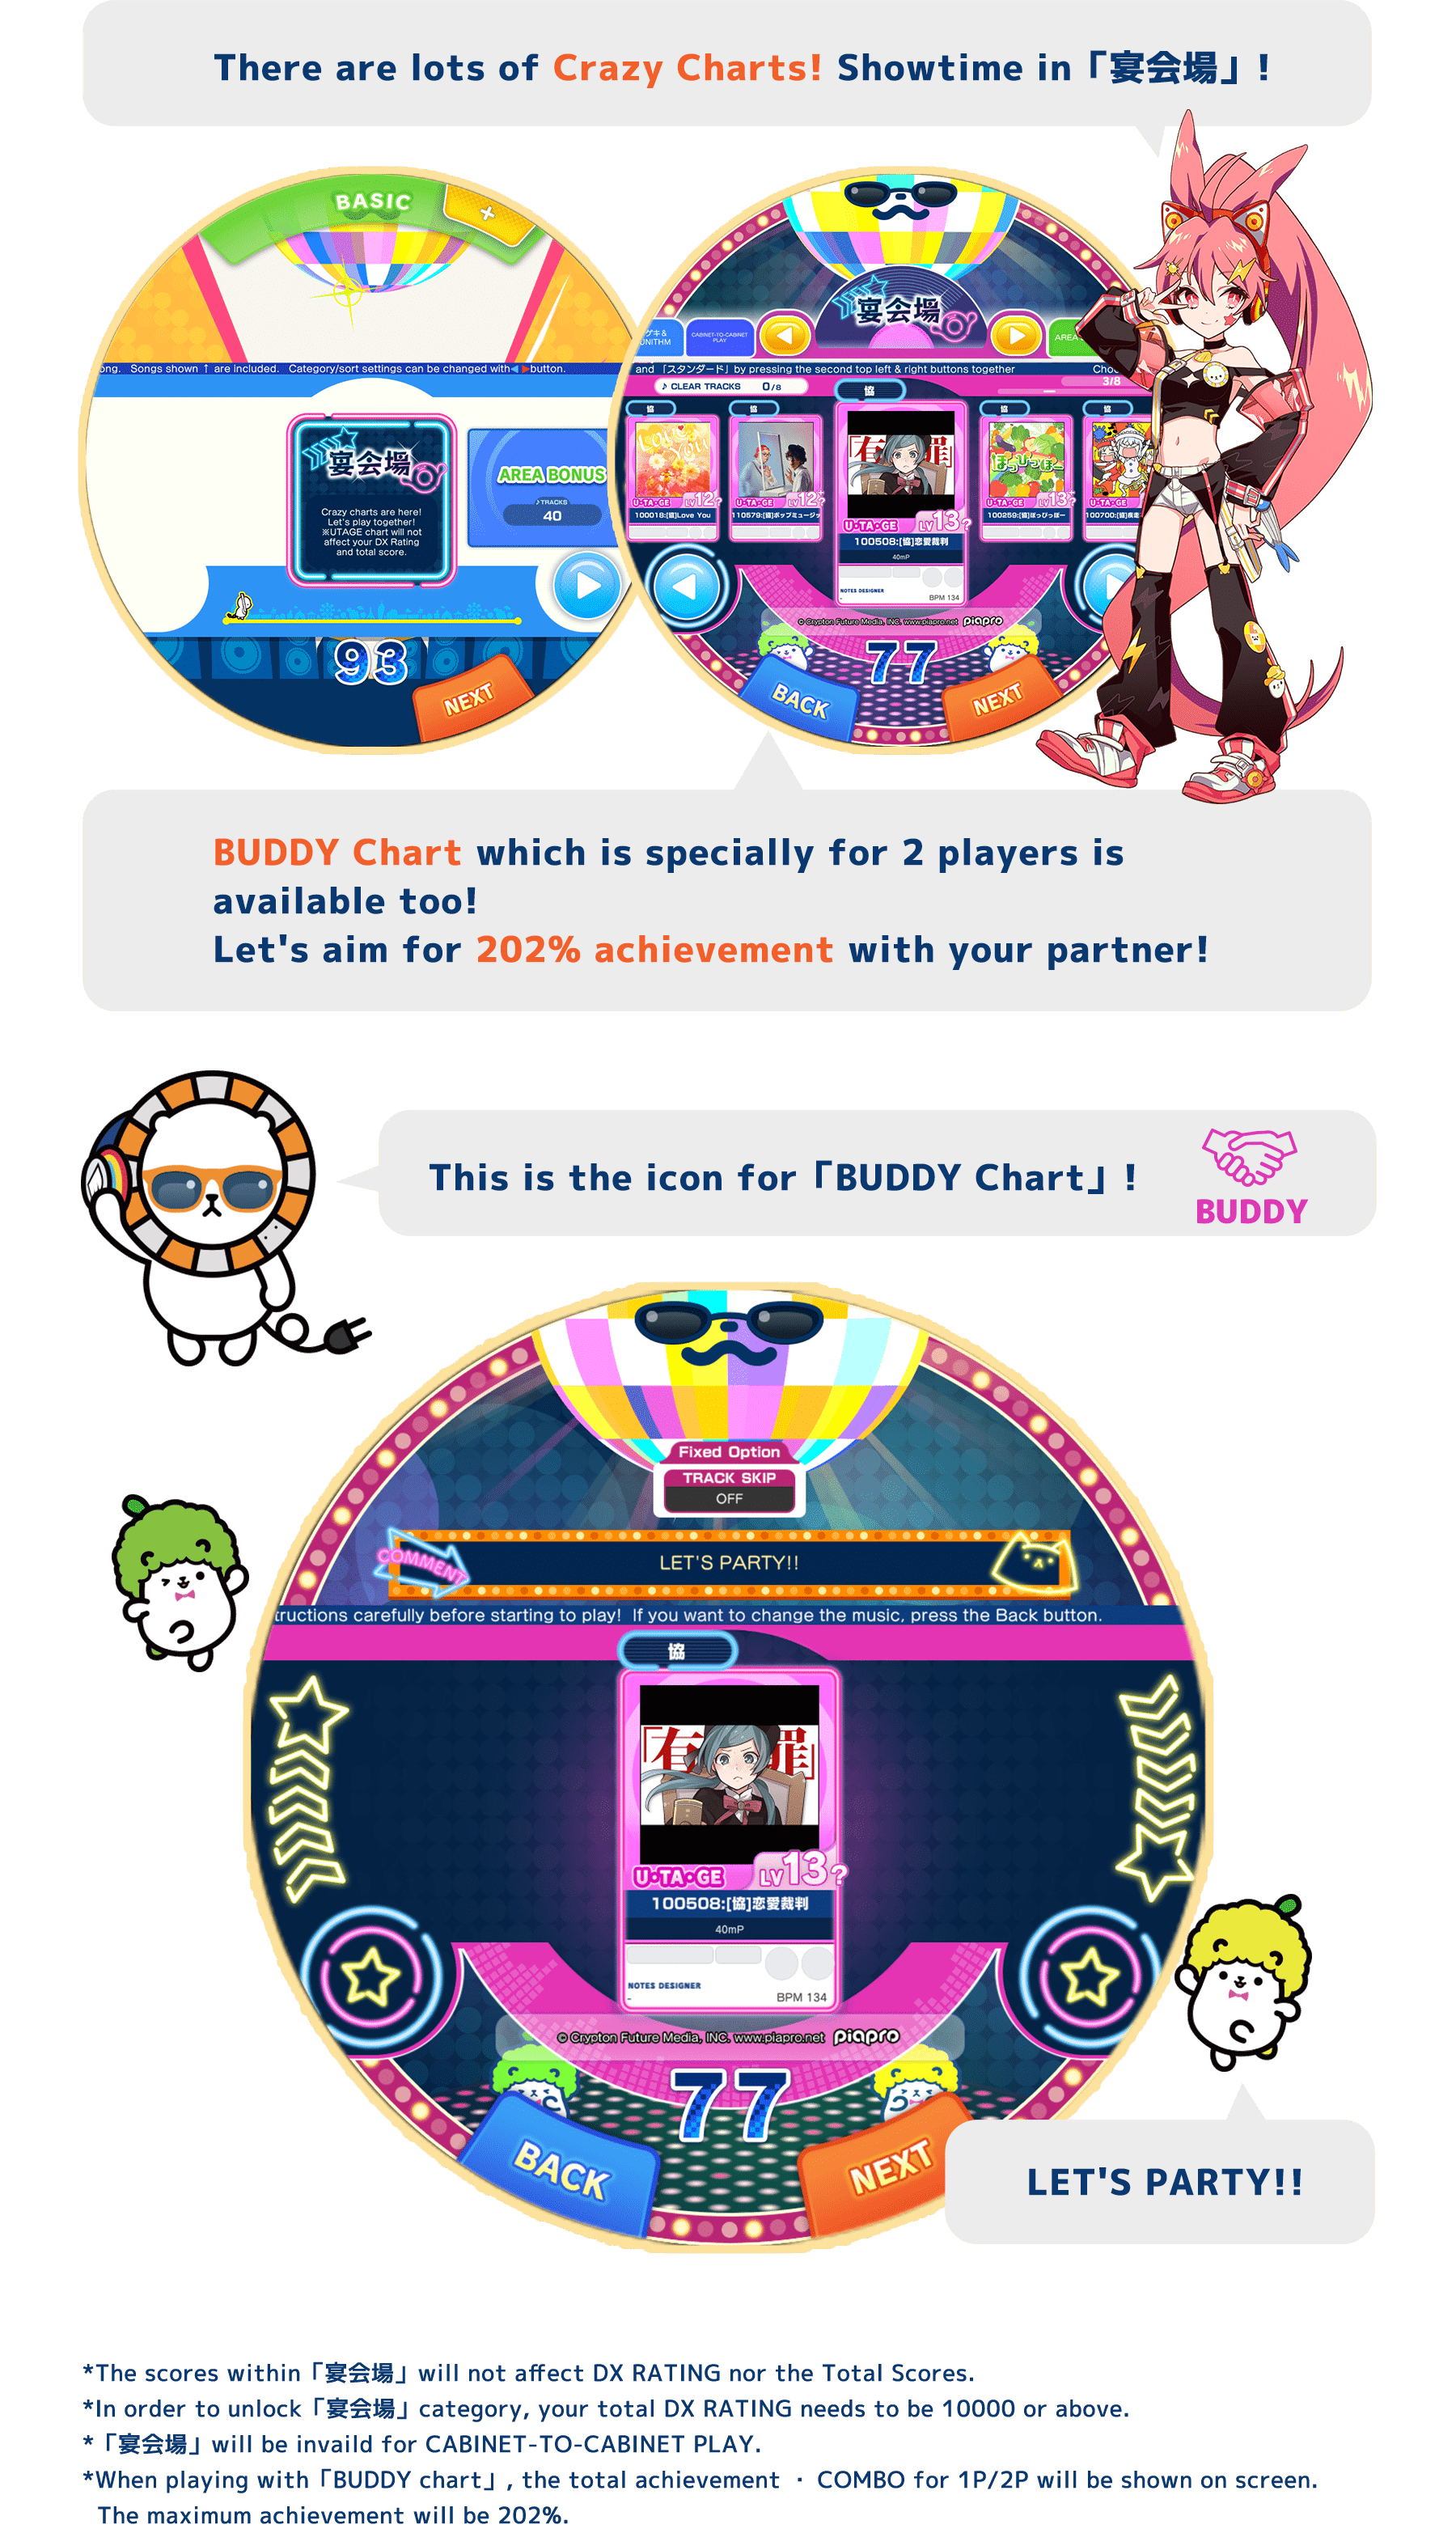 There are lots of Crazy Charts! Showtime in「宴会場」!
          BUDDY Chart which is specially for 2 players is available too! Let's aim for 202% achievement with your partner!
          This is the icon for「BUDDY Chart」!
          LET'S PARTY!!
          *The scores within「宴会場」will not affect DX RATING nor the Total Scores.
          *In order to unlock「宴会場」category, your total DX RATING needs to be 10000 or above.
          *「宴会場」will be invaild for CABINET-TO-CABINET PLAY.
          *When playing with「BUDDY chart」, the total achievement ・COMBO for 1P/2P will be shown on screen. The maximum achievement will be 202%.